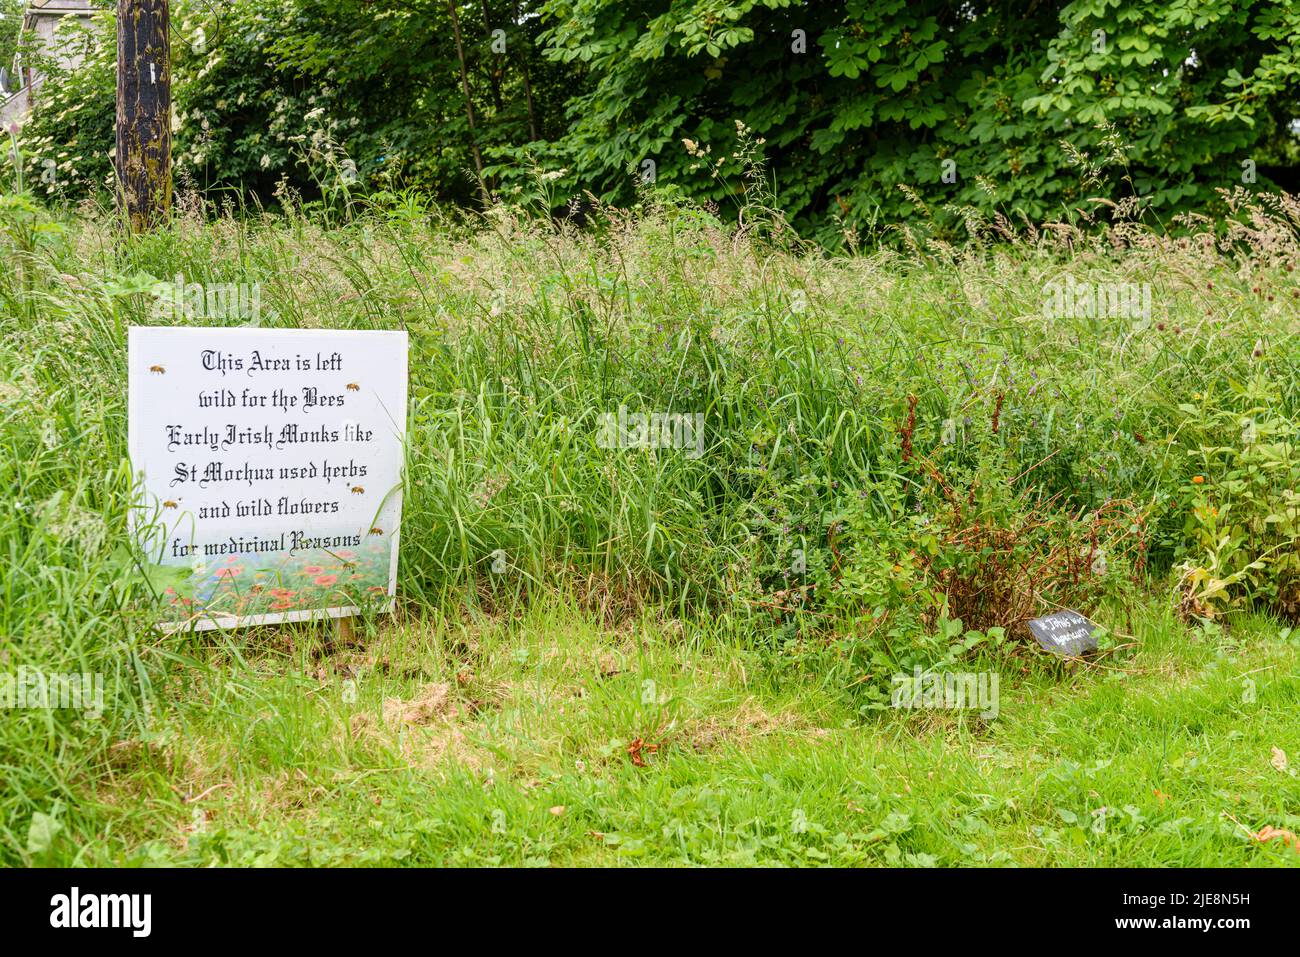 Sign in a park garden advising that the area has been left to go wild, encouraging bees and other wildlife. Stock Photo